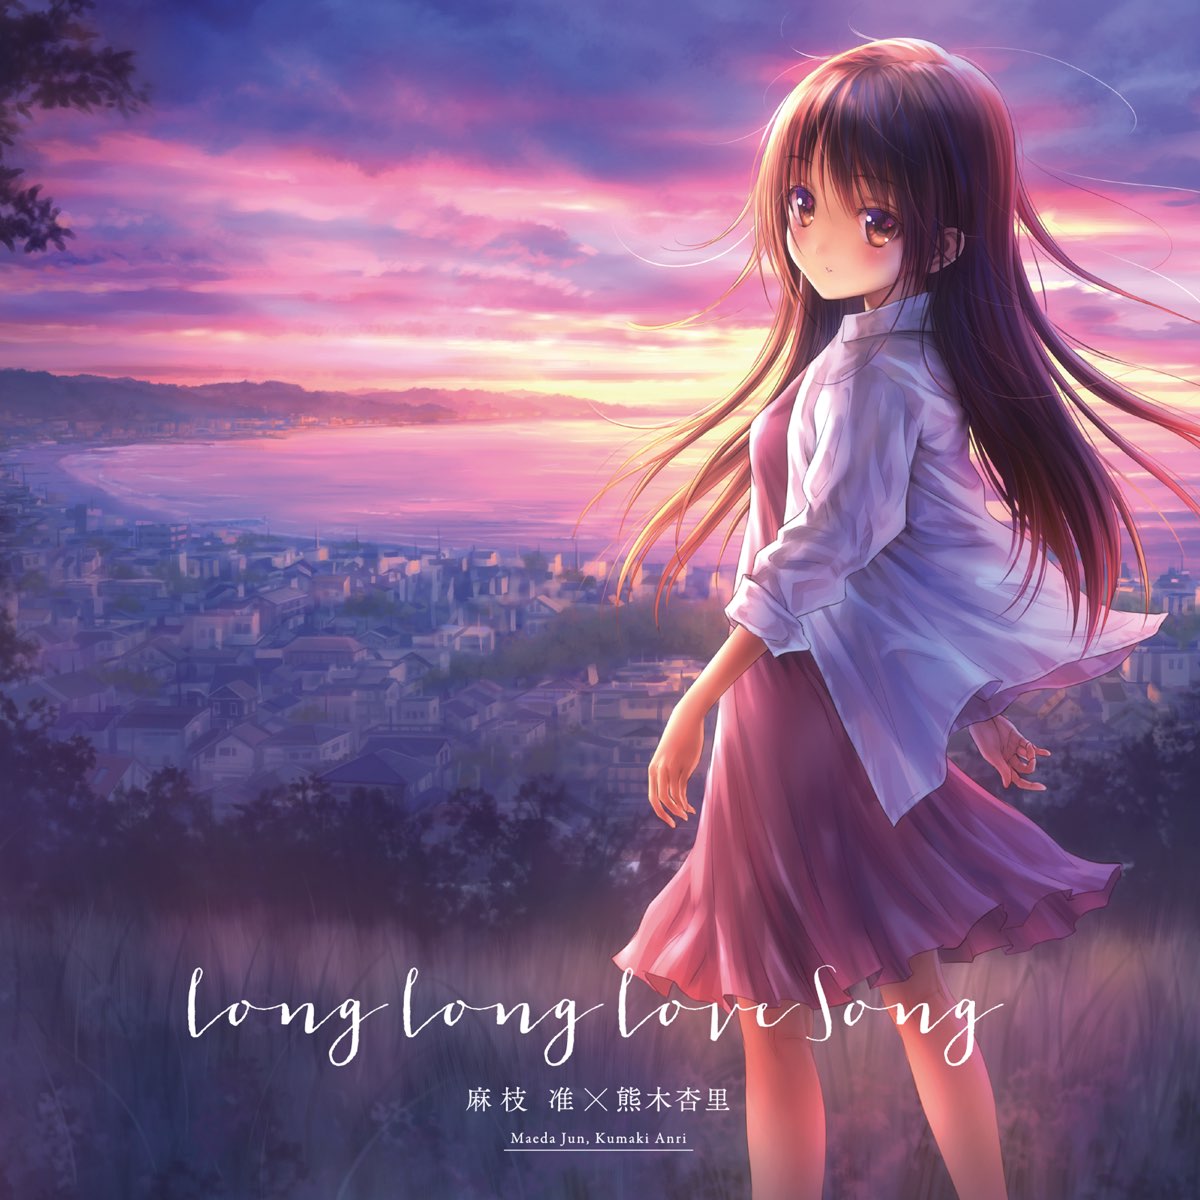 Long Long Love Song By 麻枝 准 熊木杏里 On Itunes